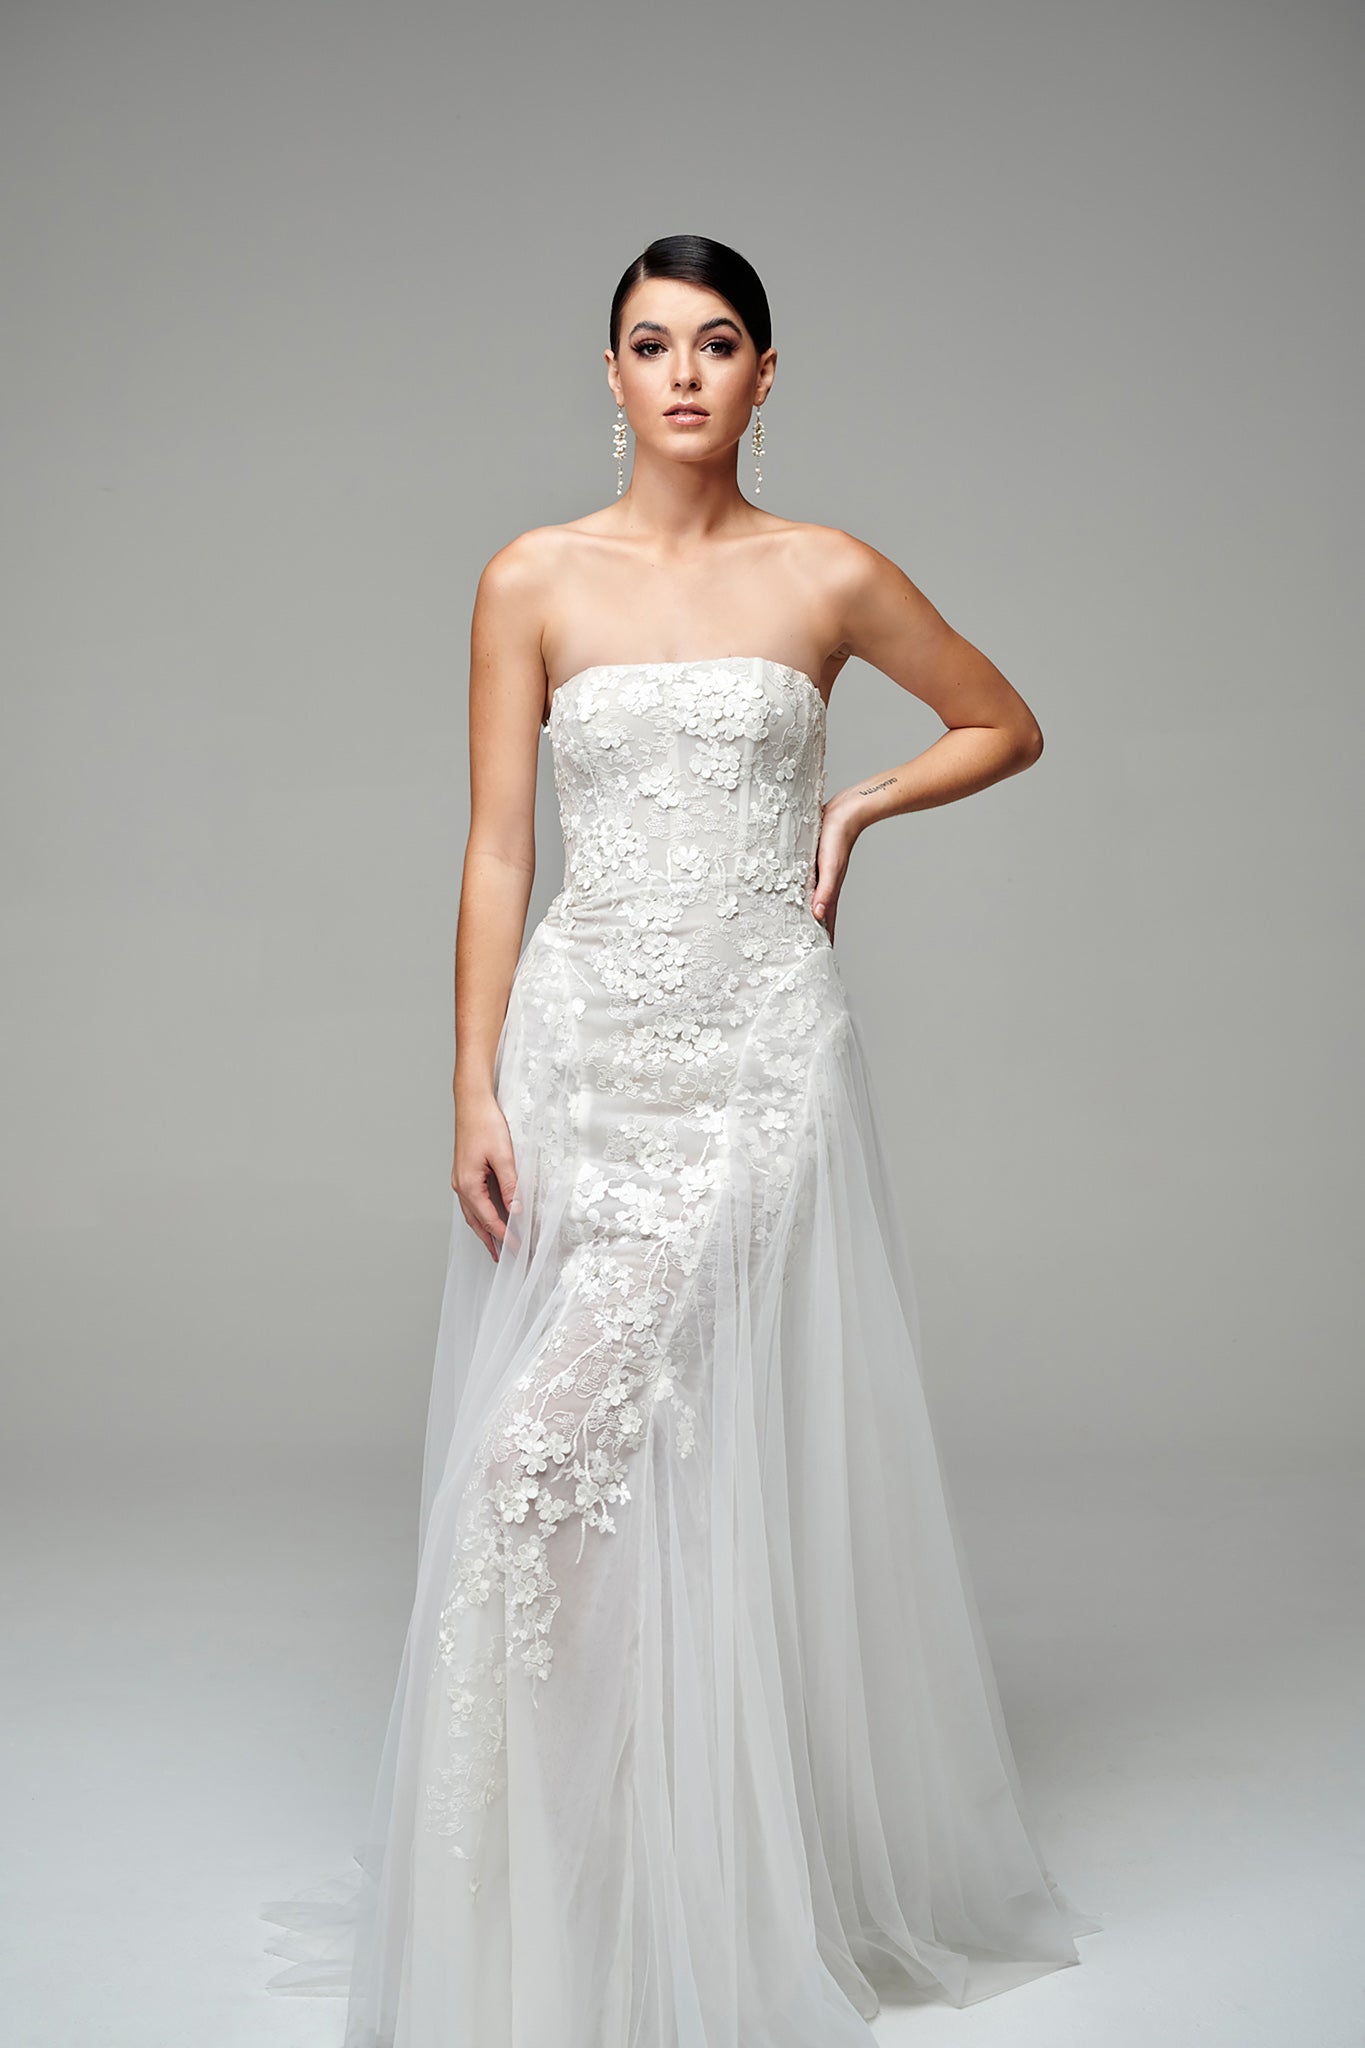 strapless floral embellished wedding dress with tulle skirt